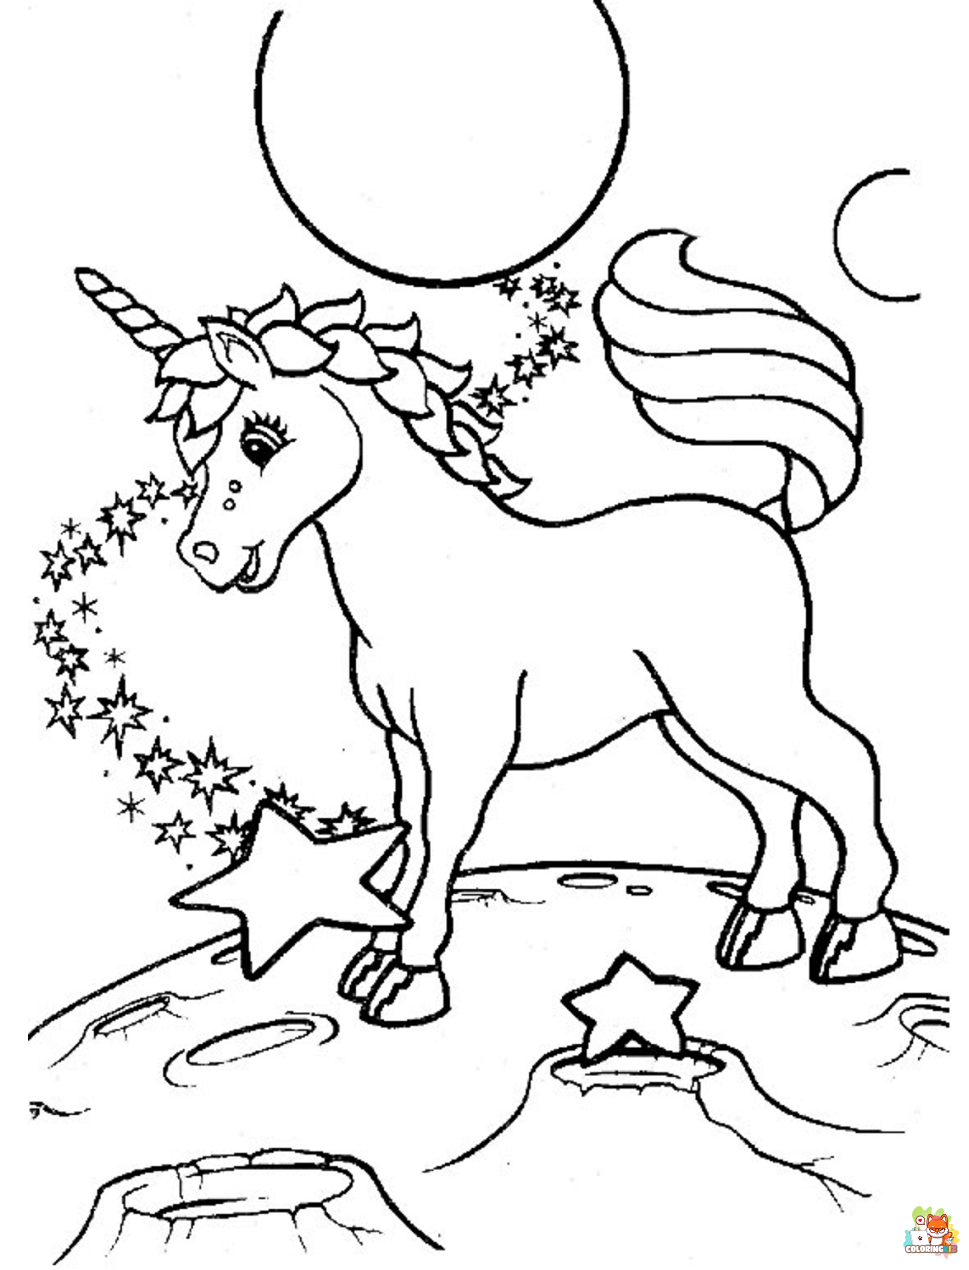 Unicorn in Lisa Frank Coloring Pages 1